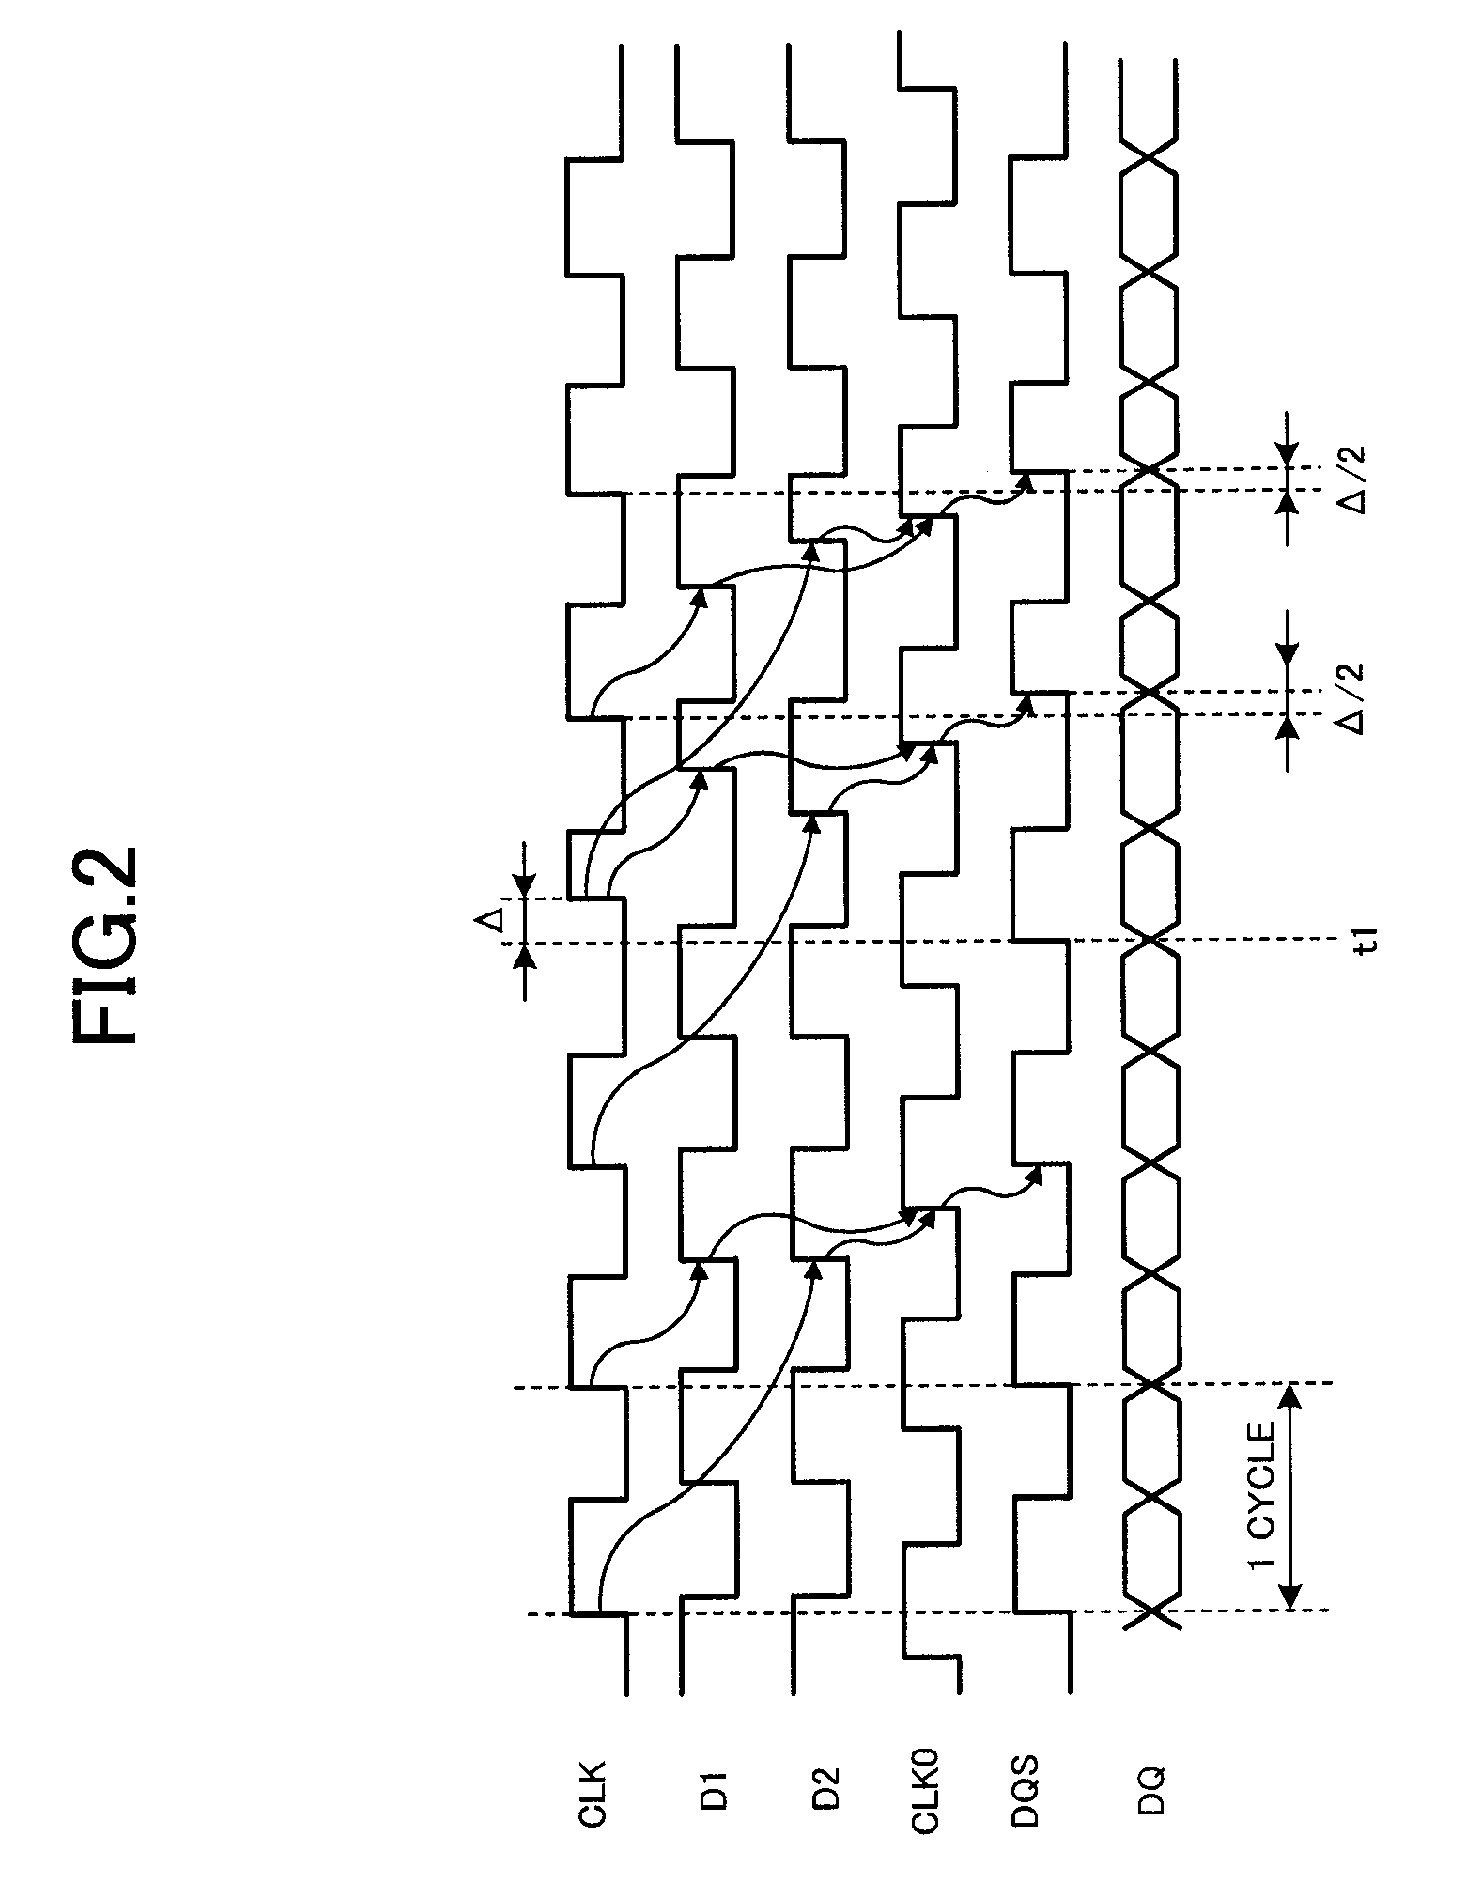 Dll circuit and semiconductor device having the same